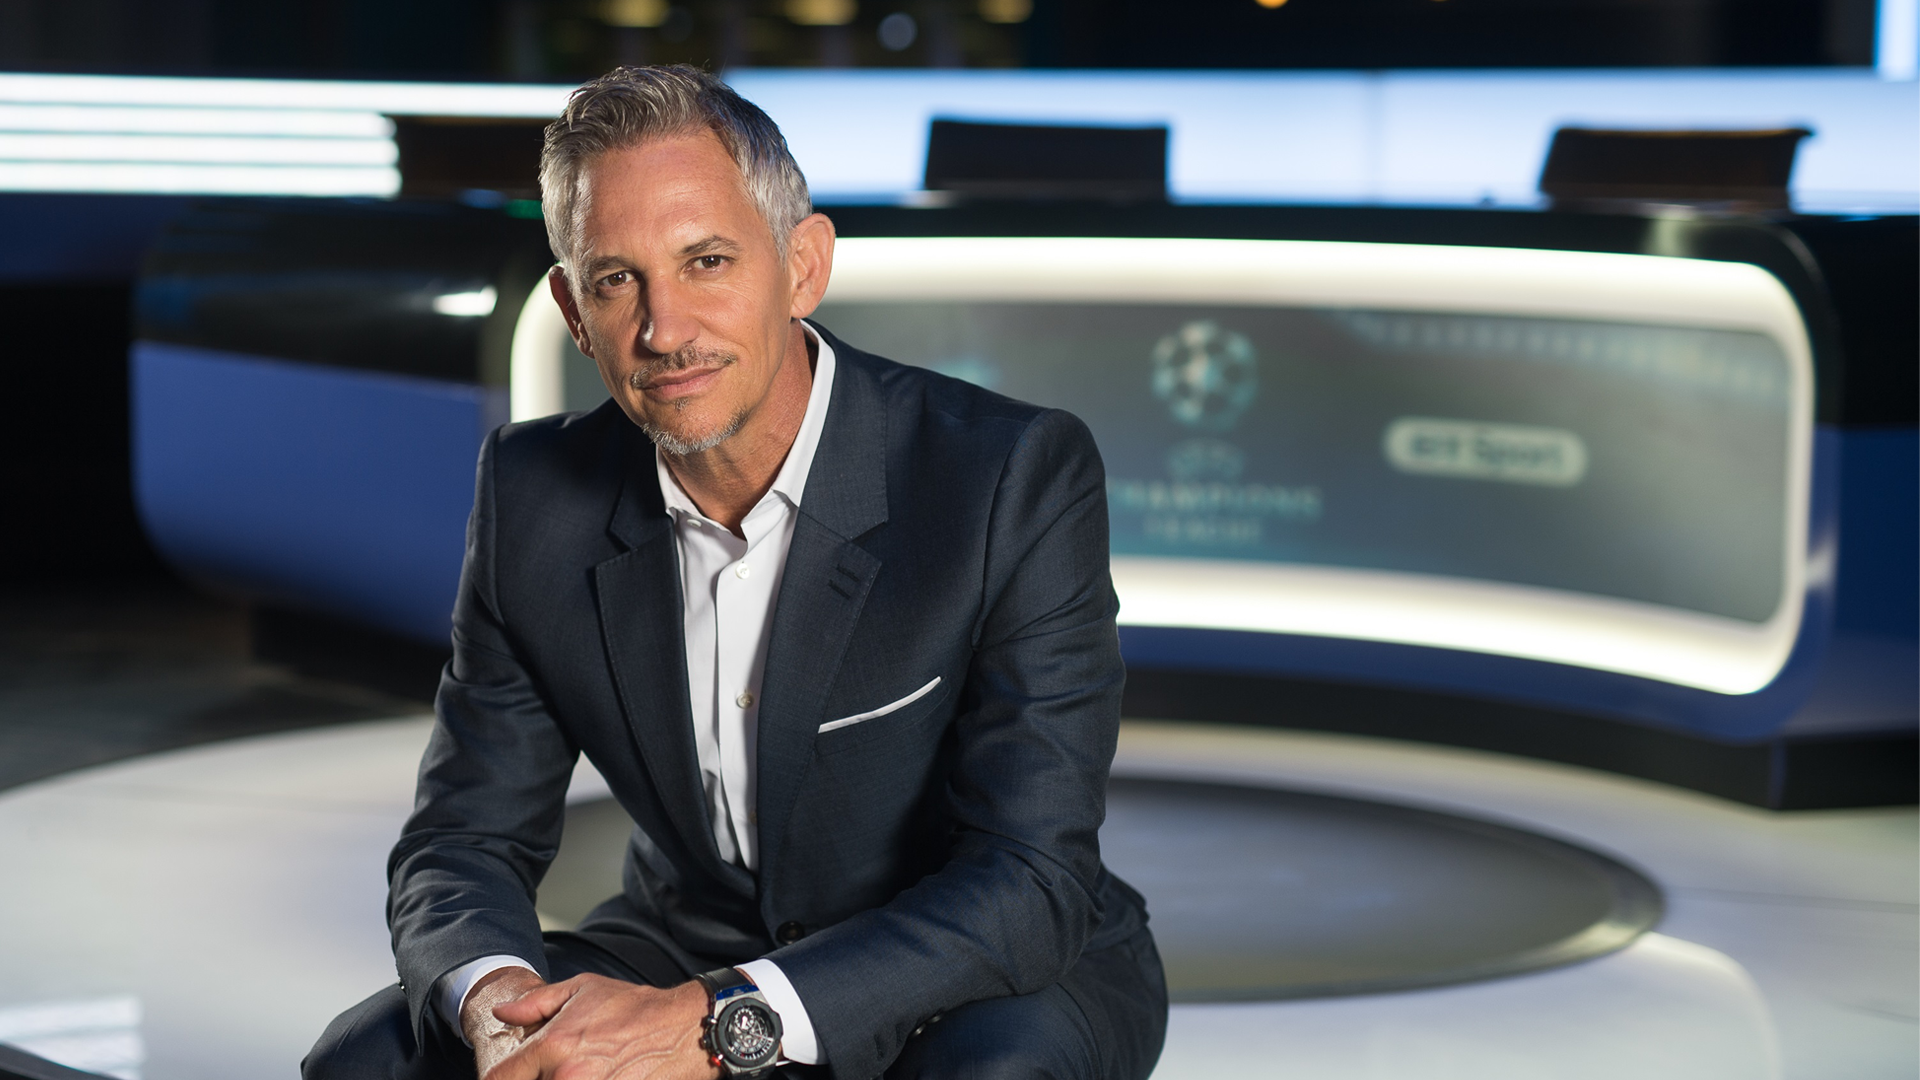 The BBC reached an agreement to bring back a sports presenter